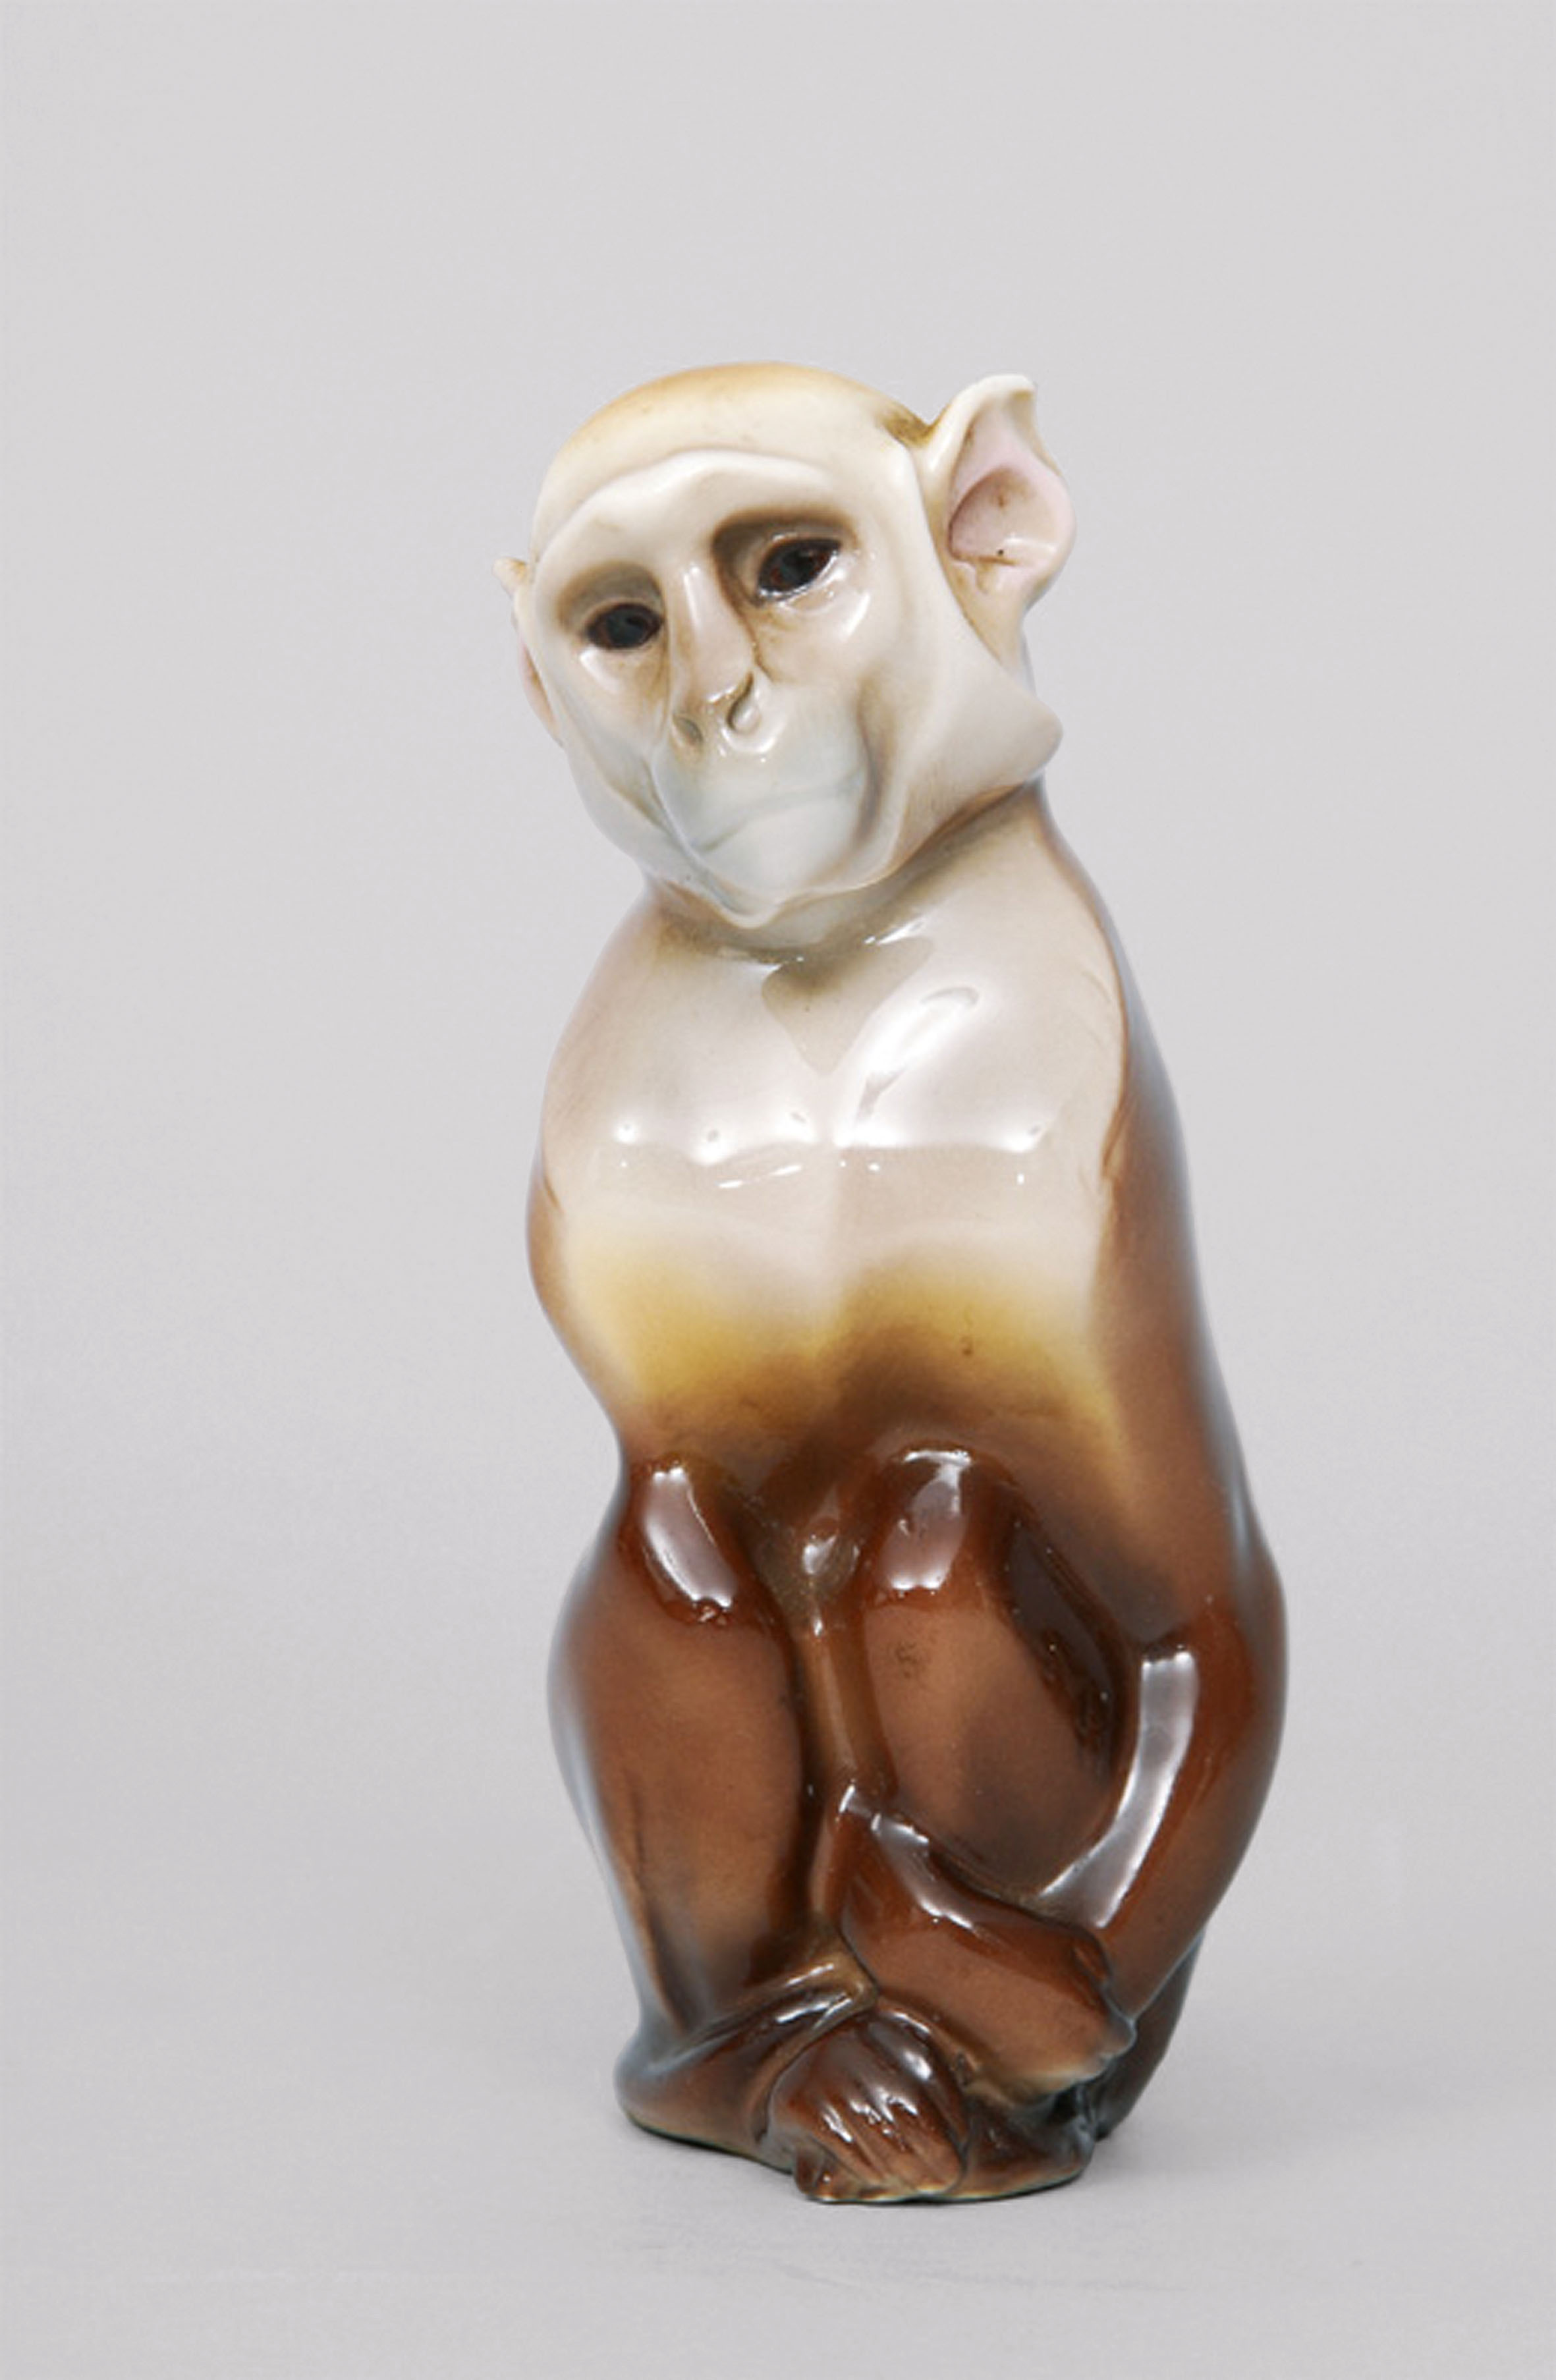 A small seated monkey